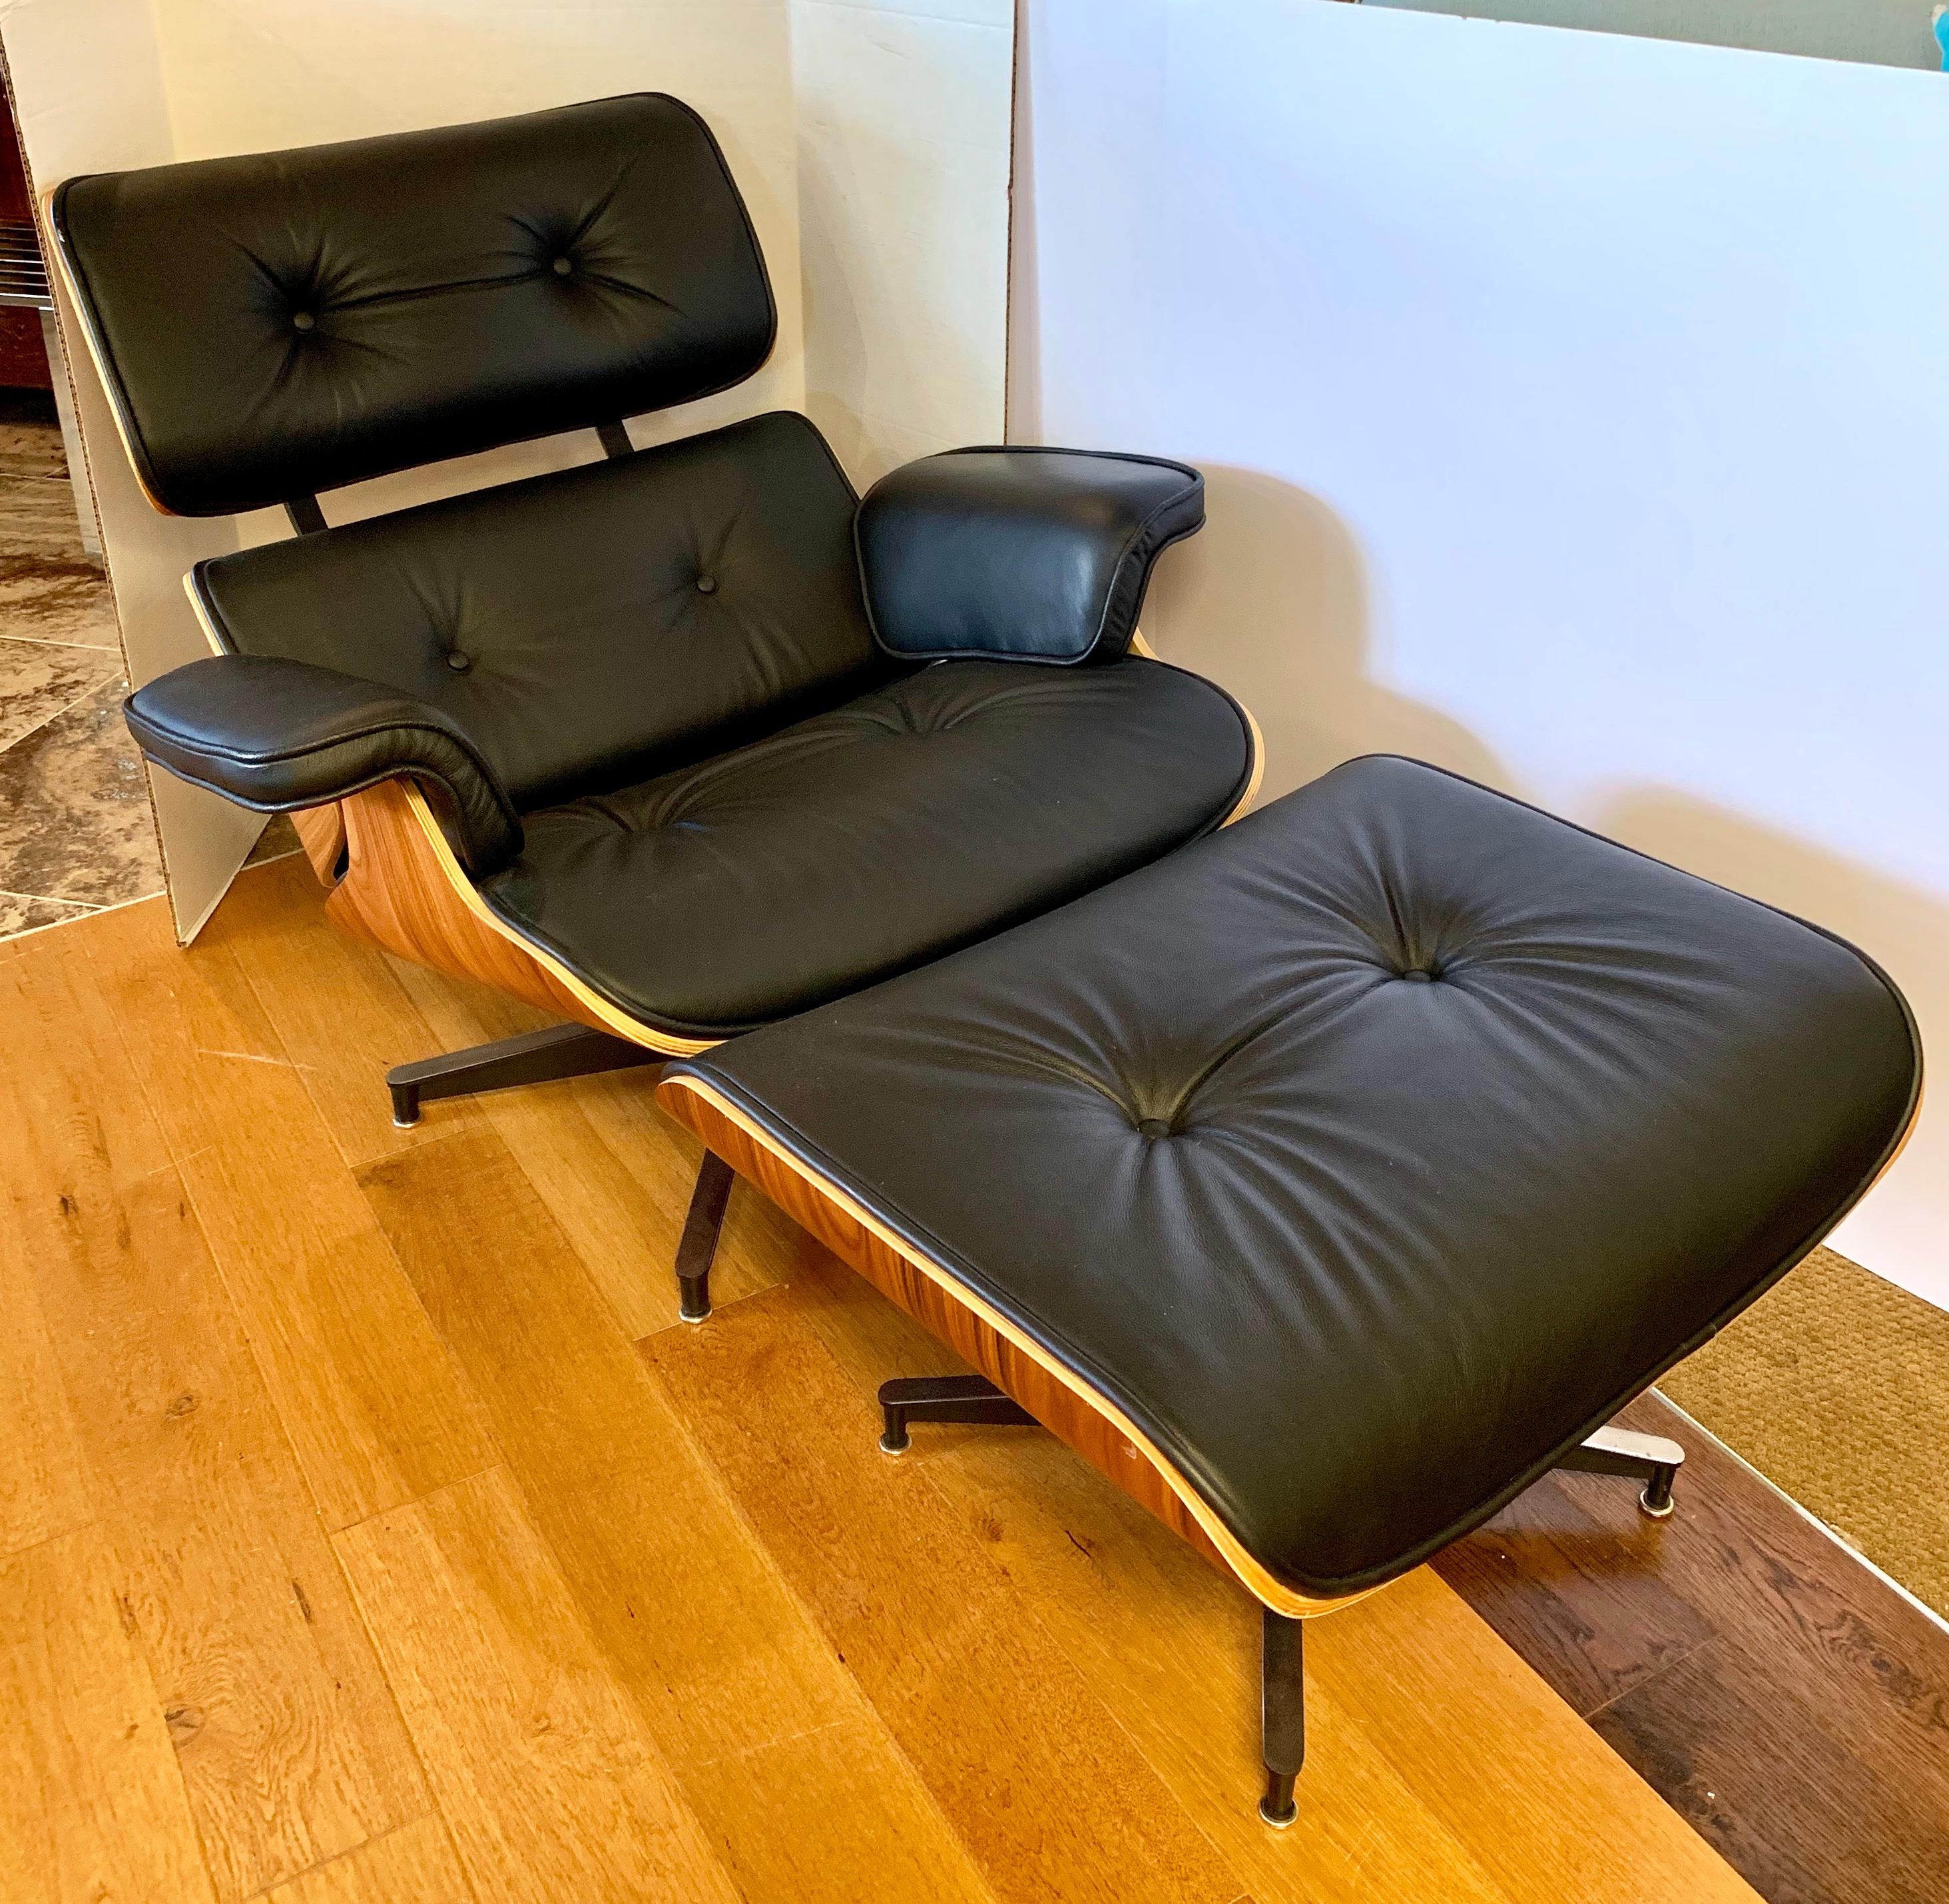 Well made recent reproduction of the iconic Herman Miller chair in ottoman. Leather is real, soft and the highest quality. Condition is excellent. There are no signatures.